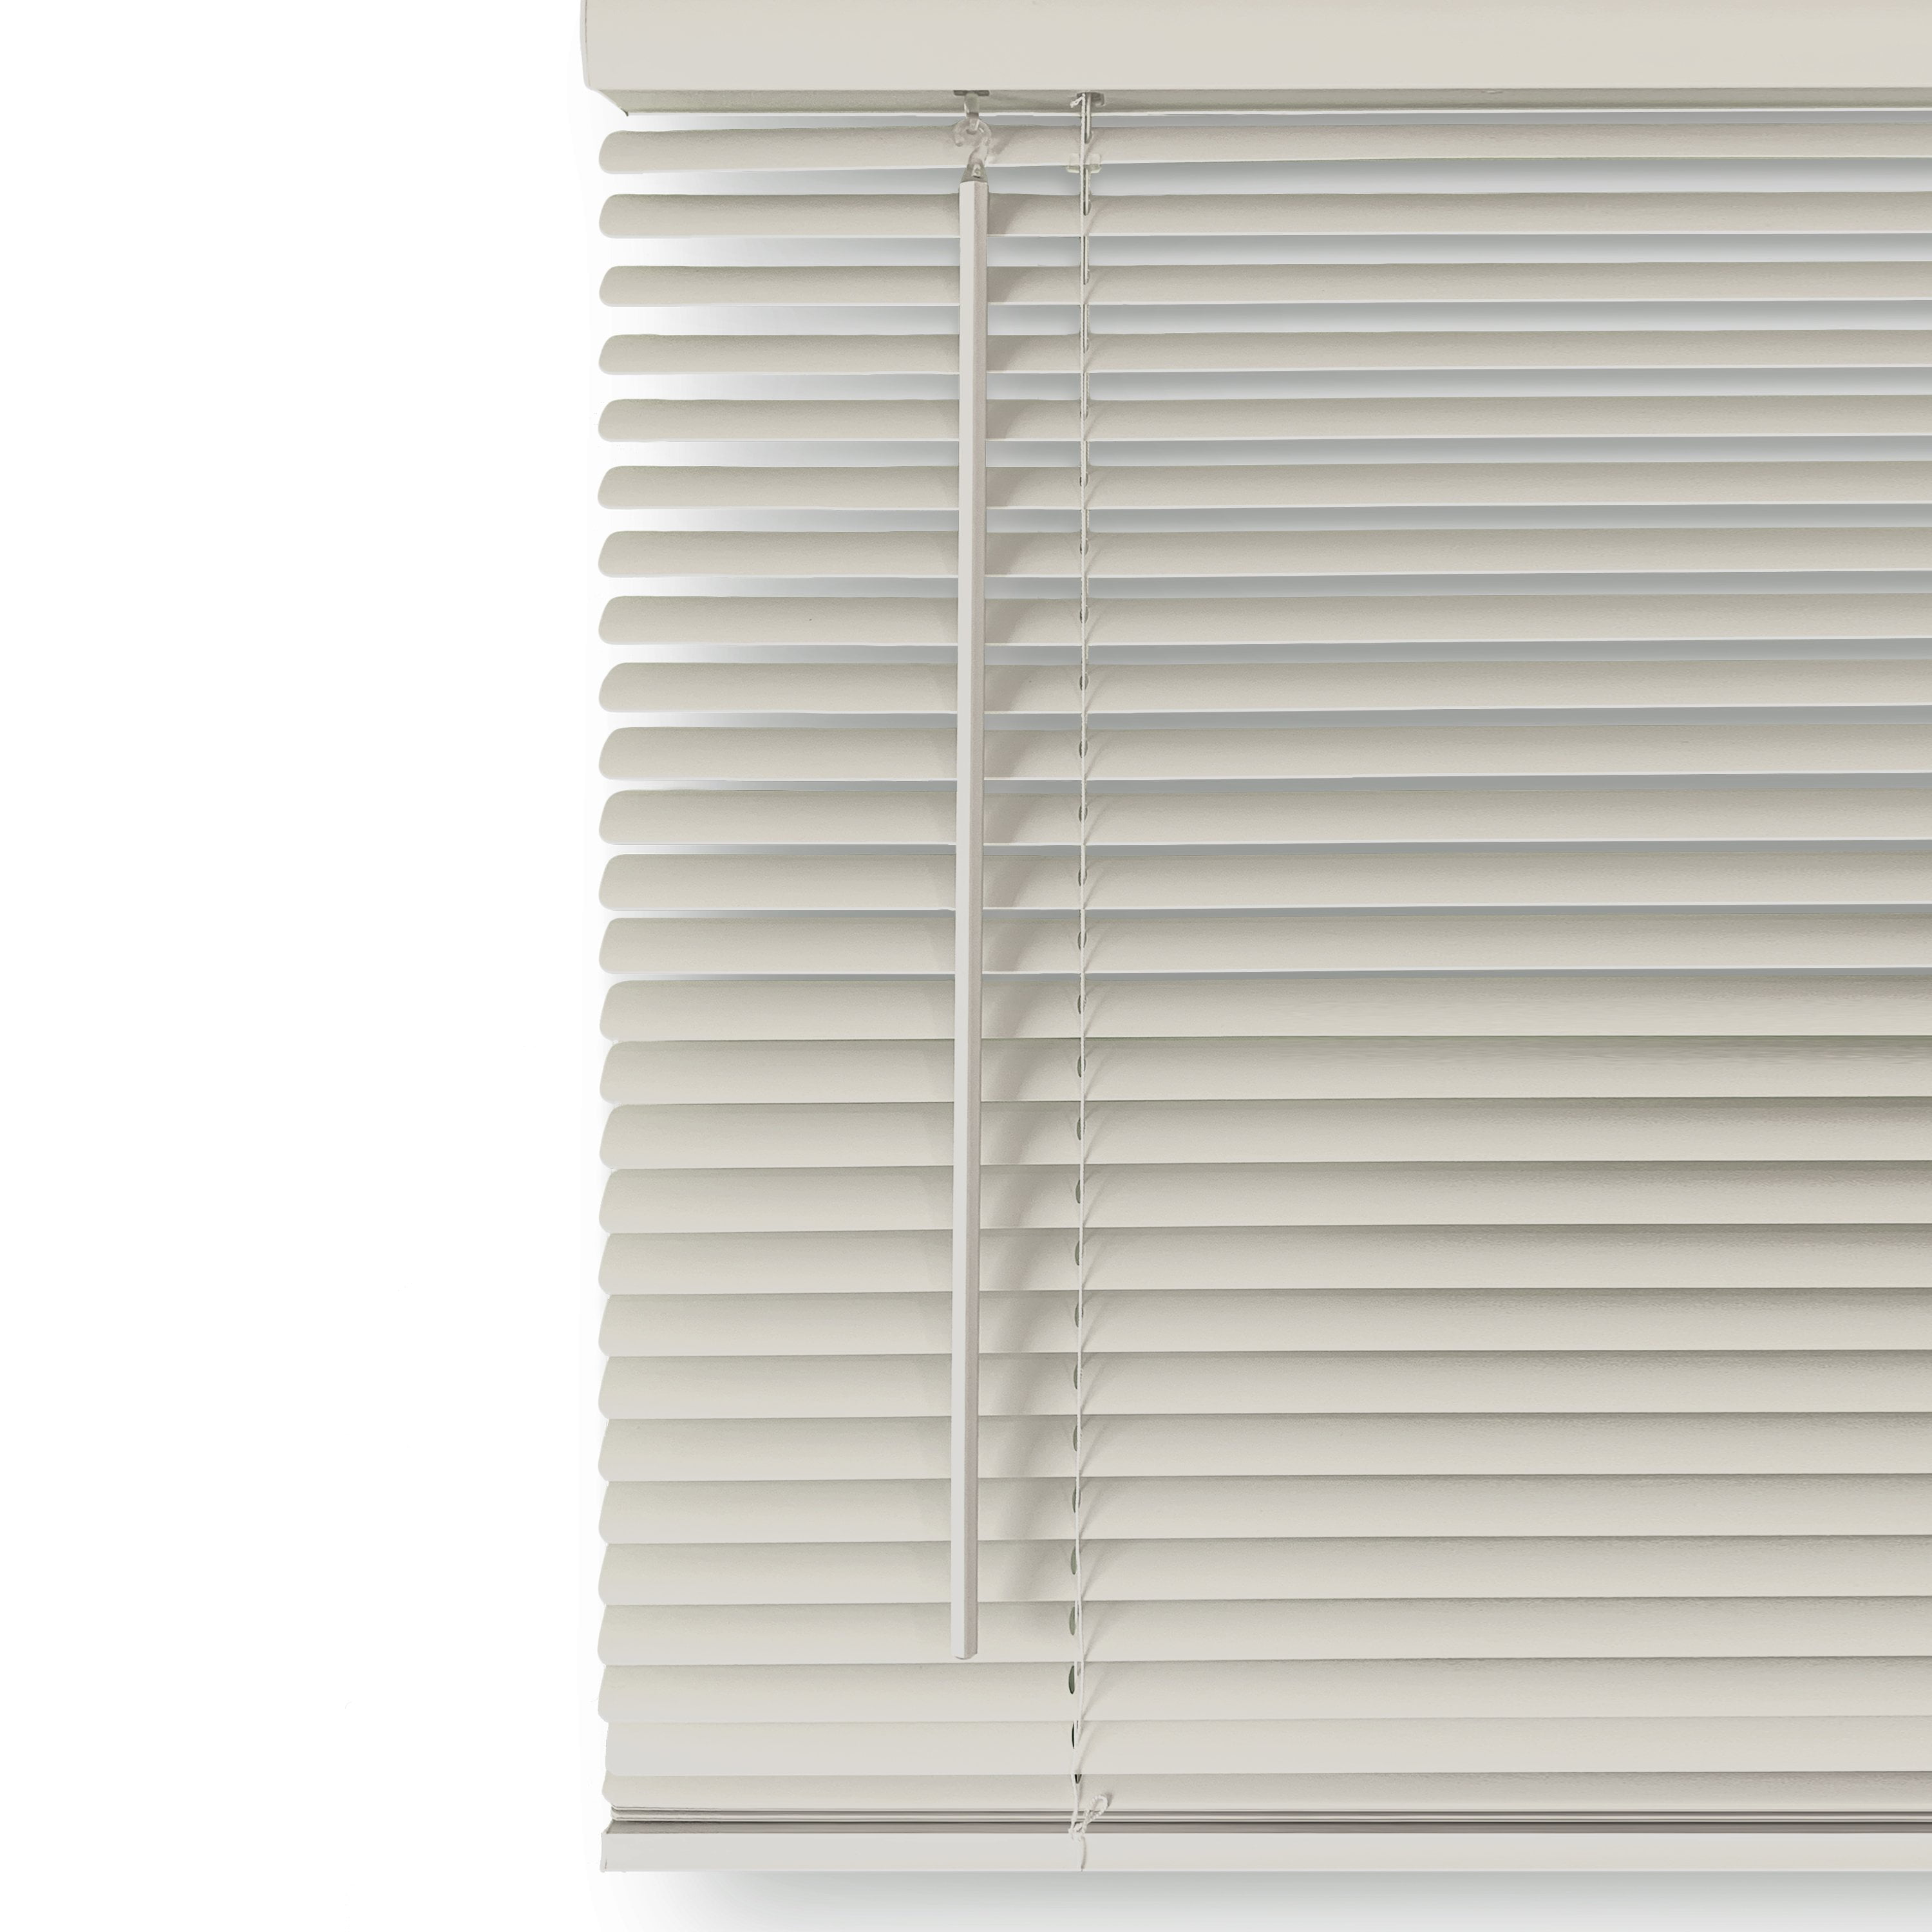 Details about   Vinyl Mini Blind Cordless Window Blinds Shade Washable White 23" W x 64" L 1" 